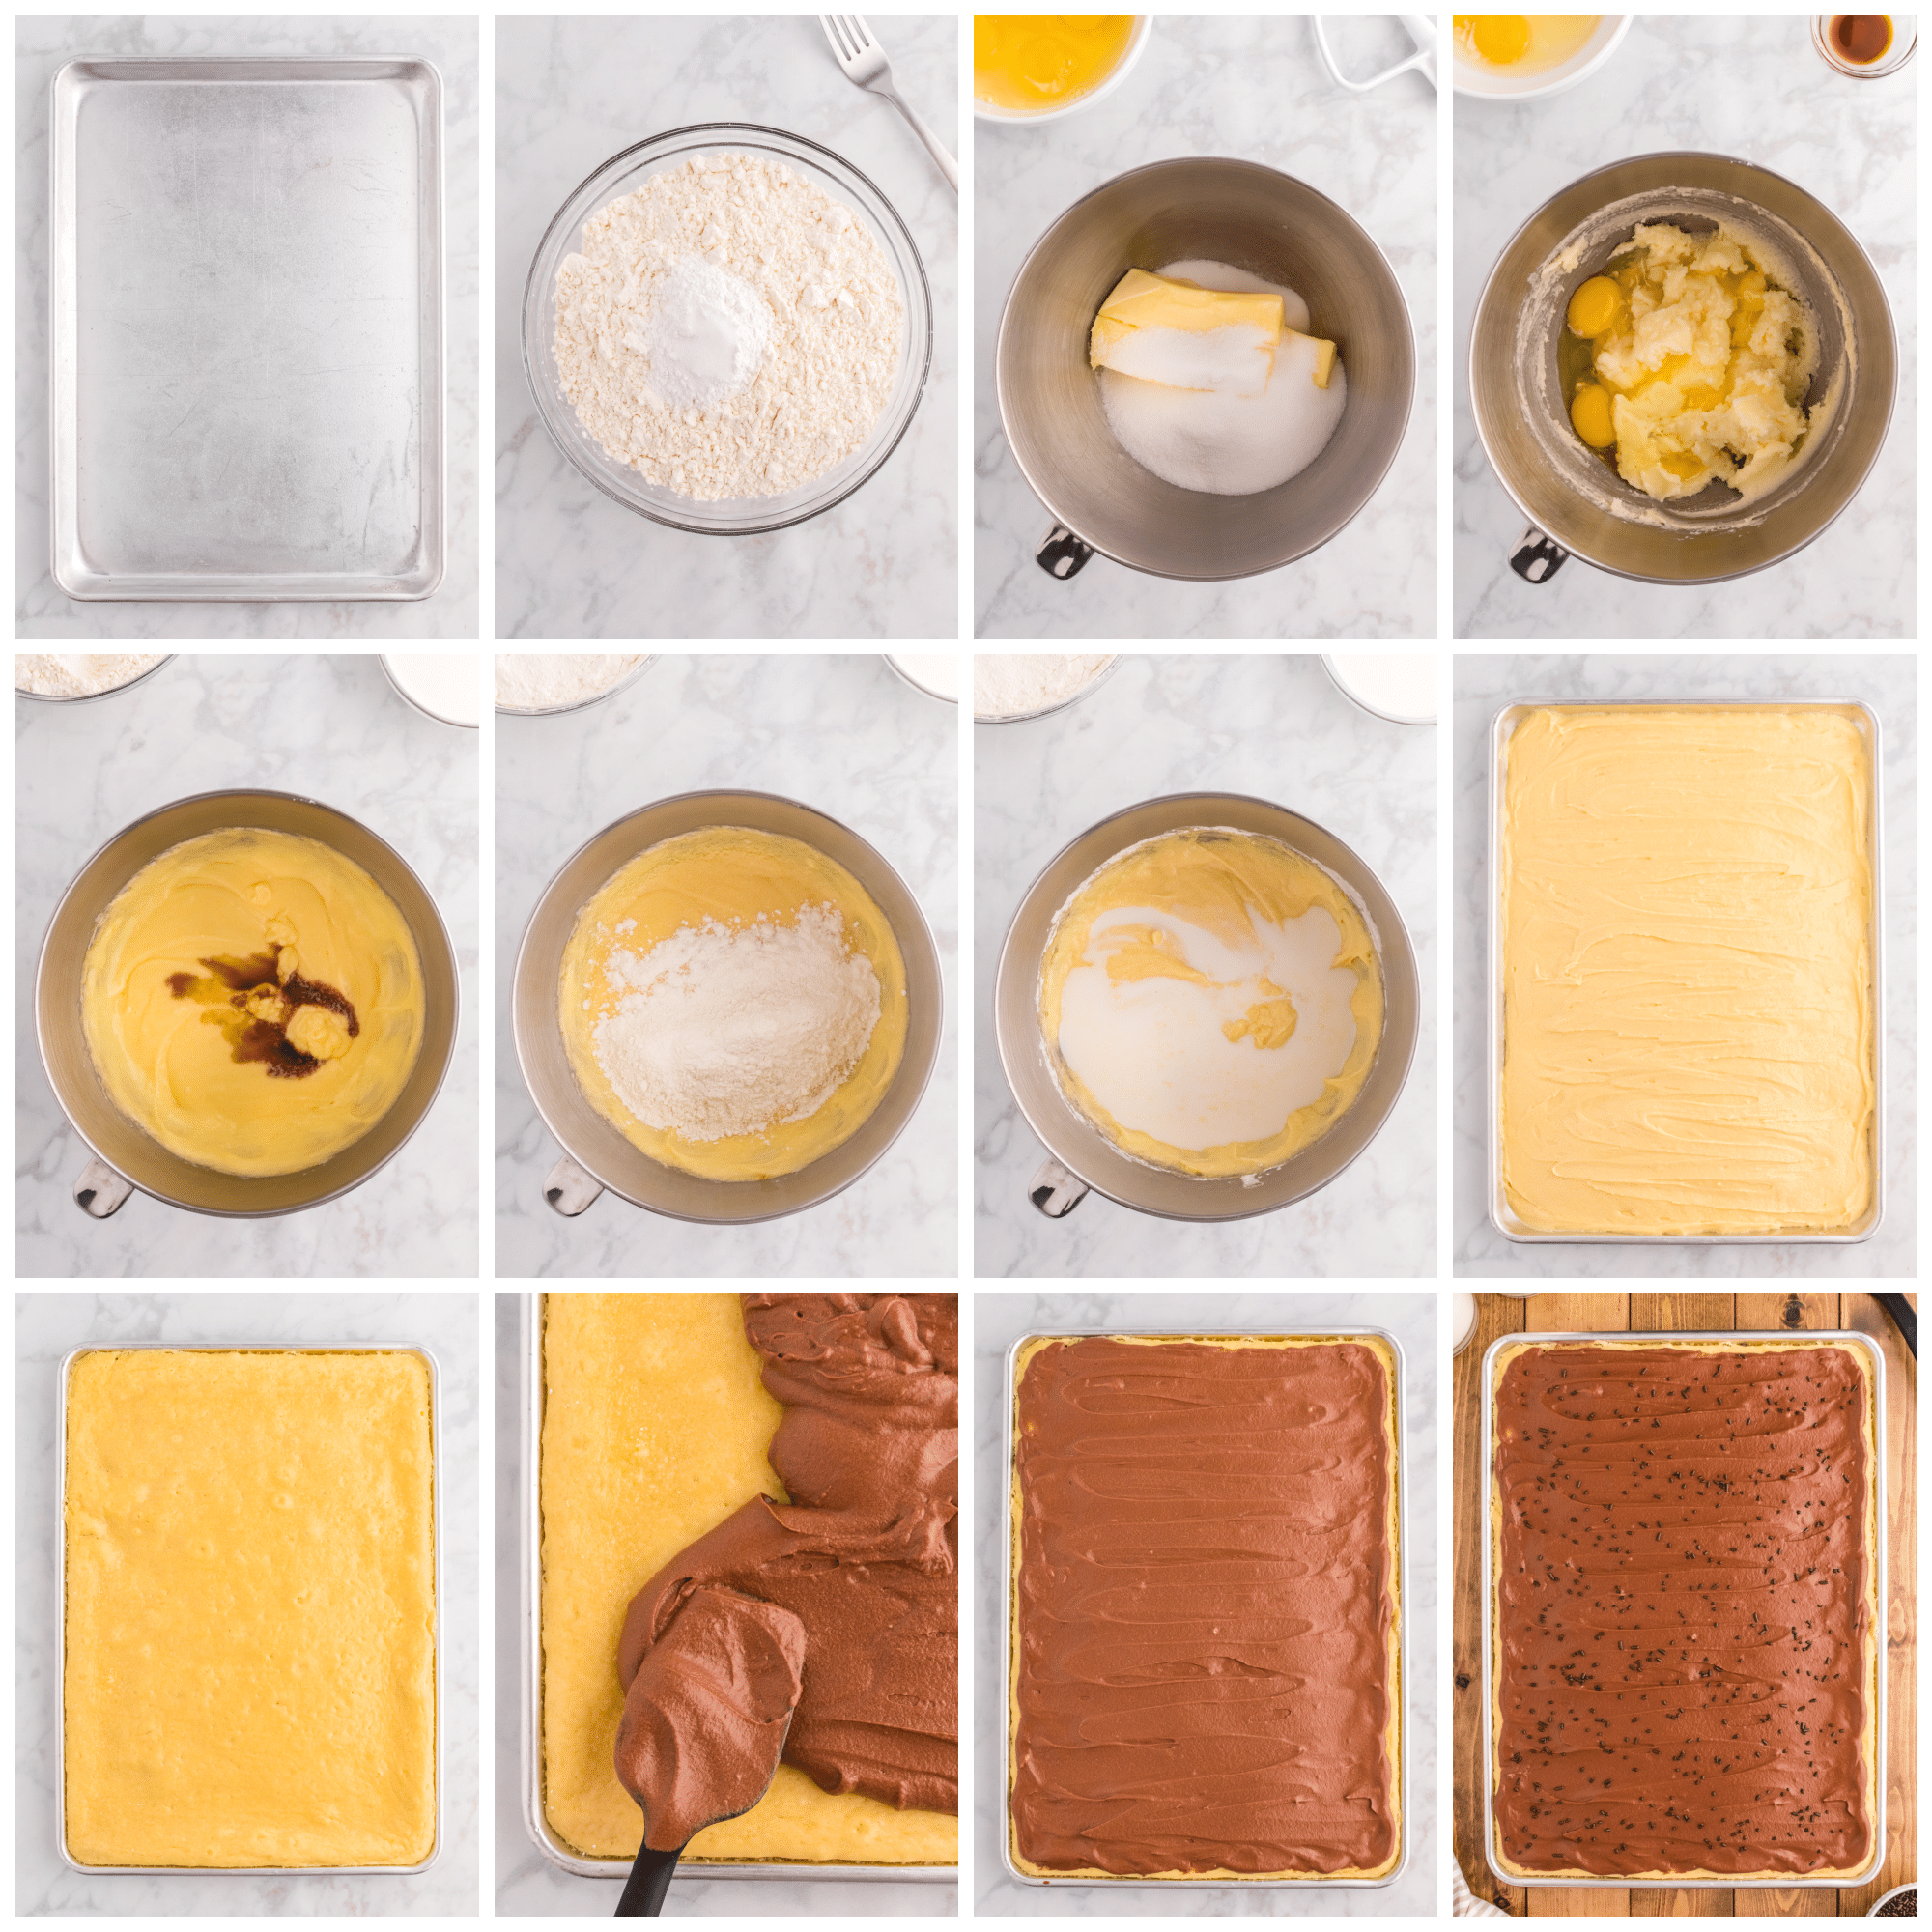 A collage images showing the steps necessary to make this recipe.